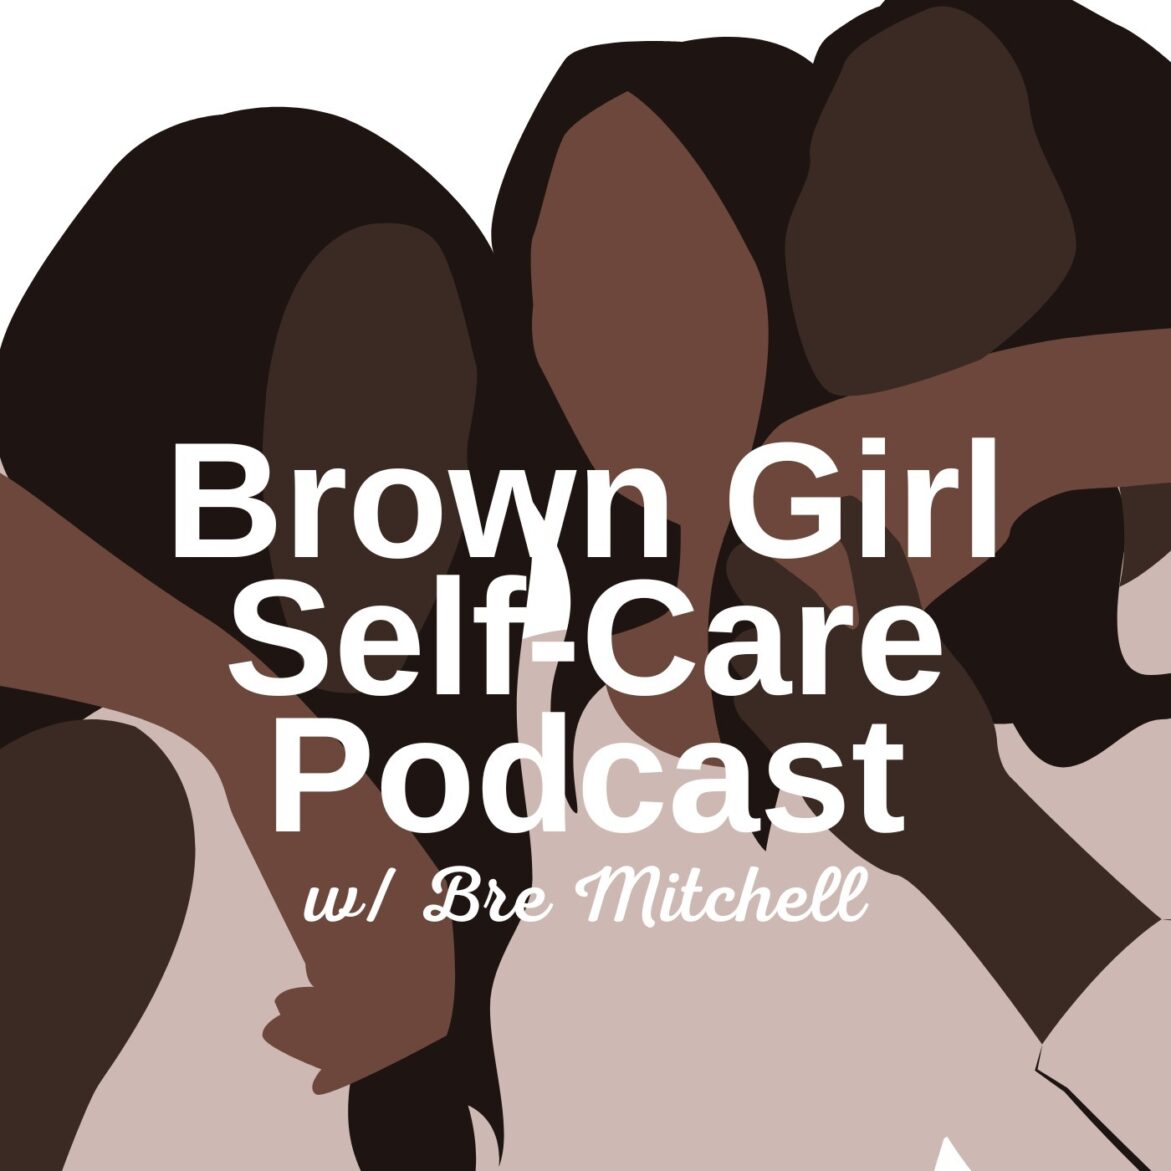 Black Podcasting - 5 Ways To Know You Are Healing PLUS An Affirmation For Black Women Who Are Healing